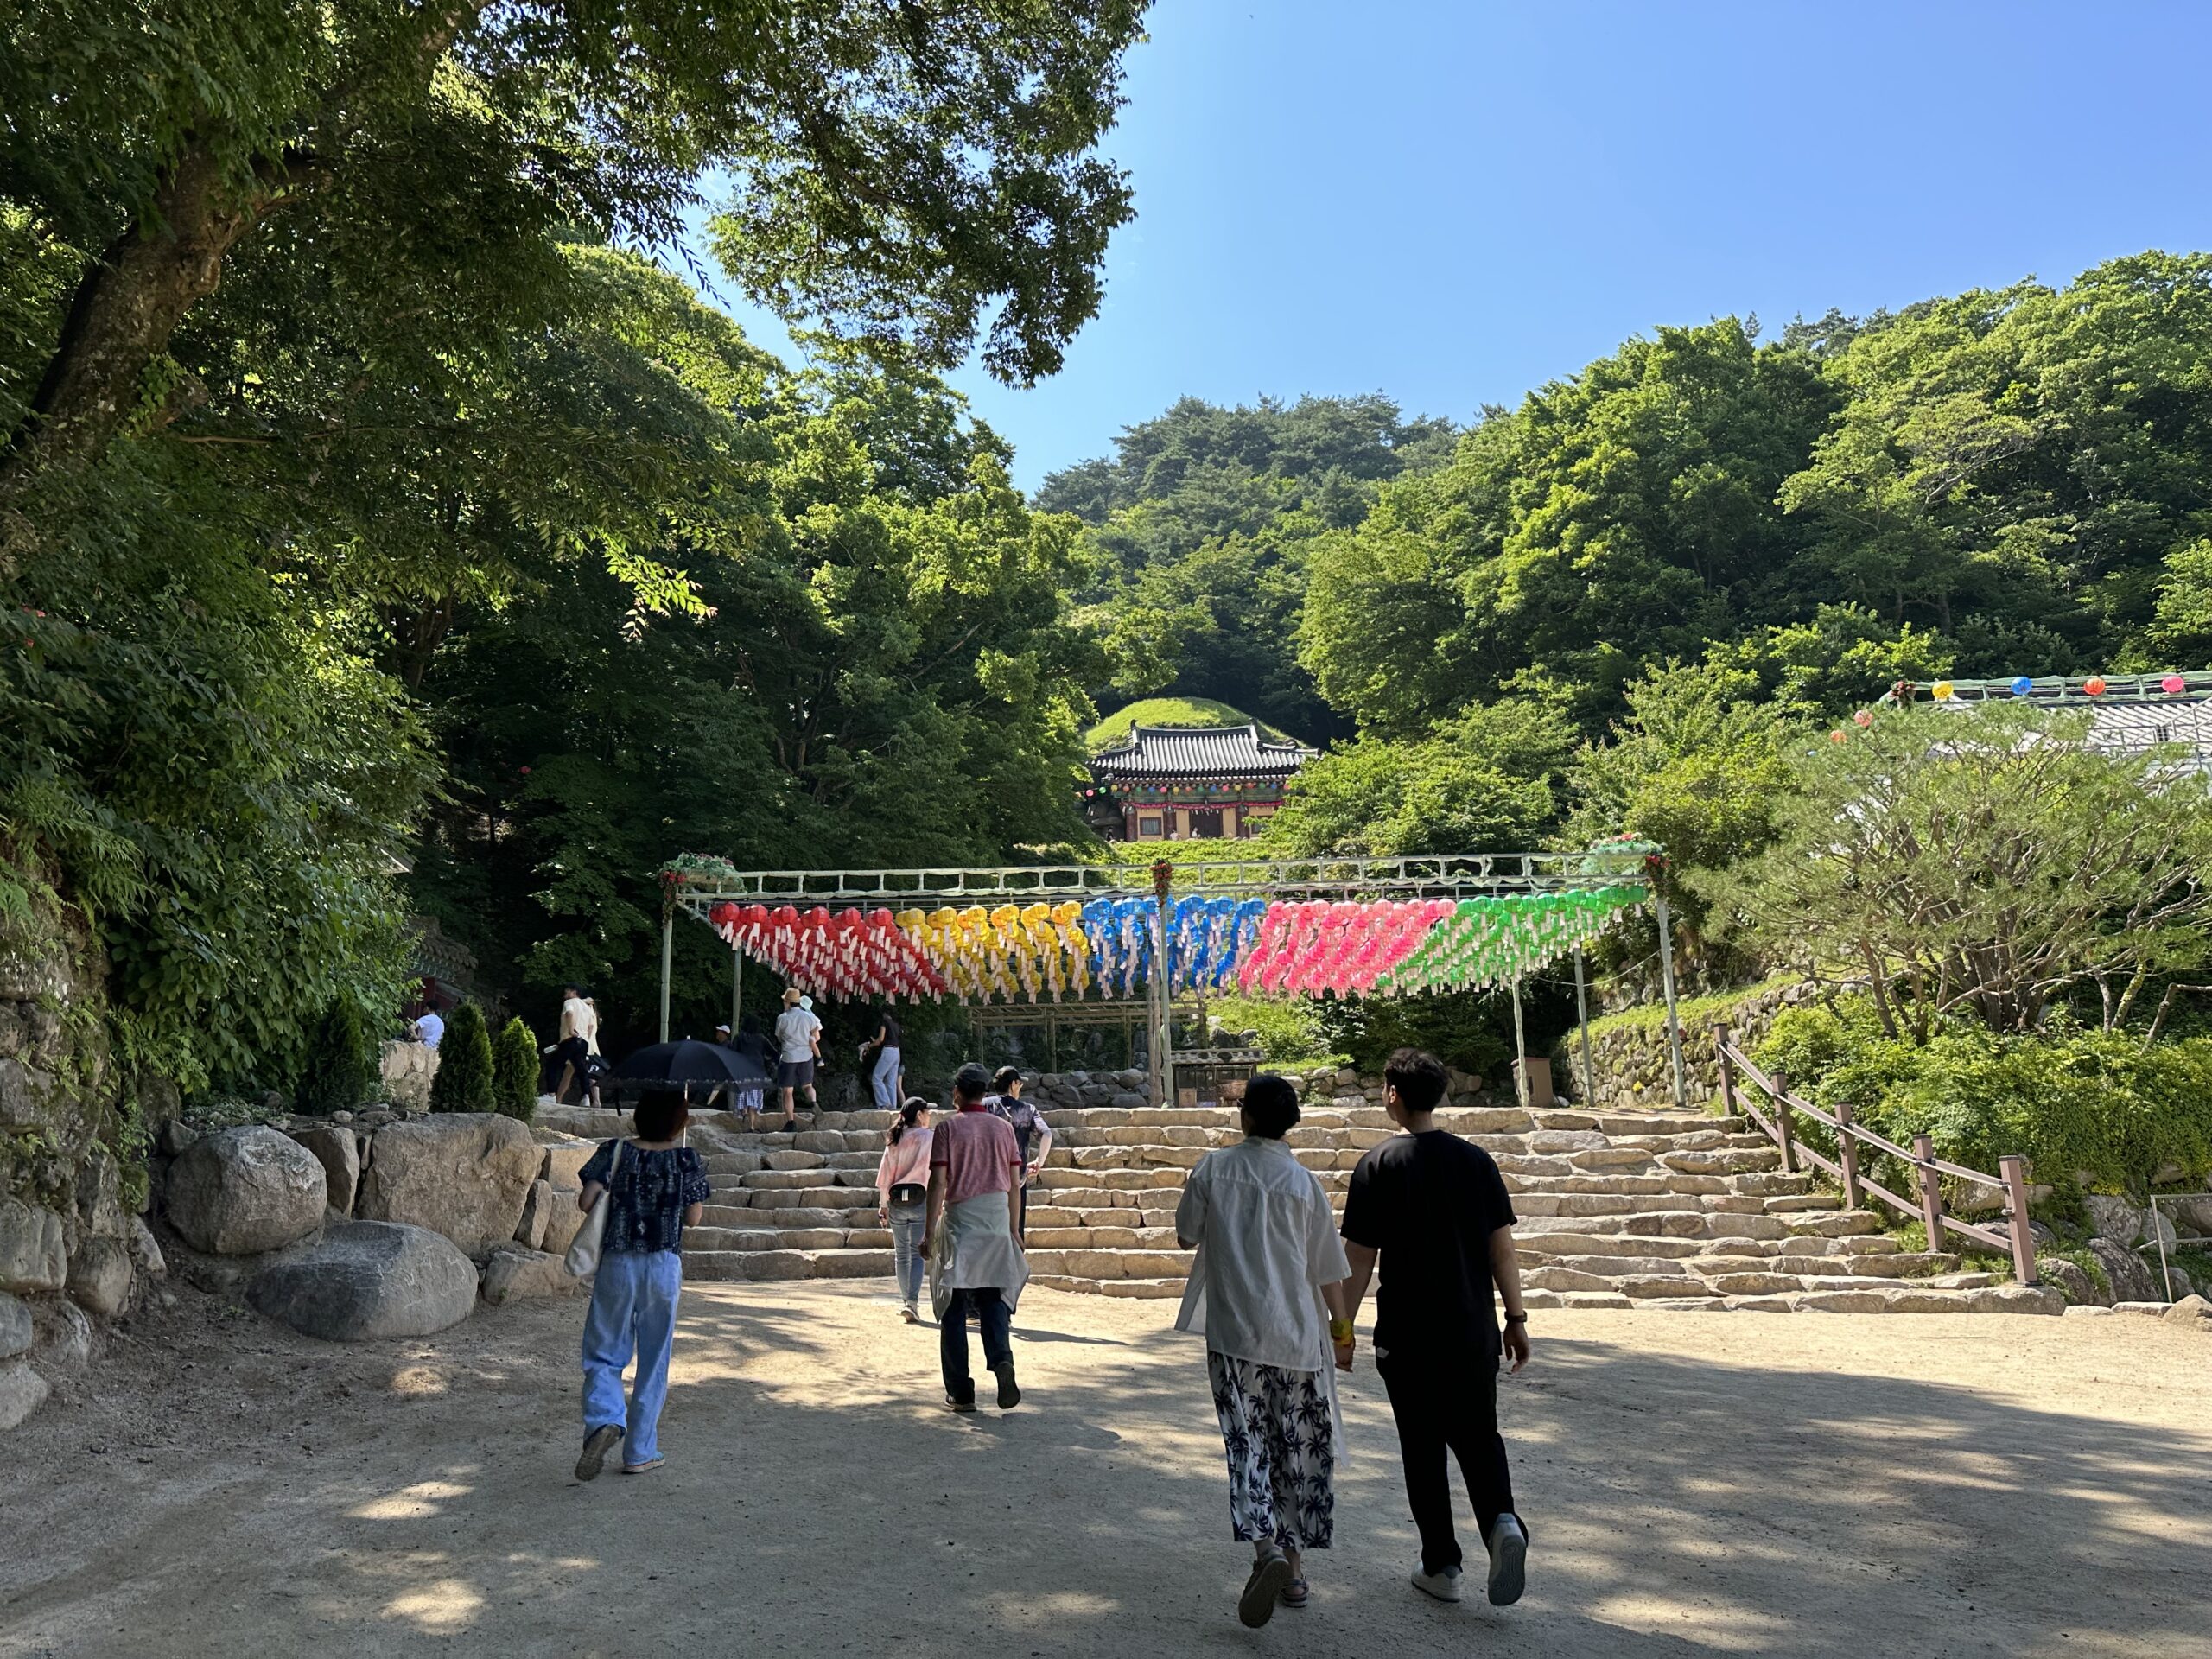 Stop Nr. 4: Seokguram Grotto. The grotto on top of the hill contains a monumental statue of Buddha which is considered a masterpiece of Buddhist art in the far east.